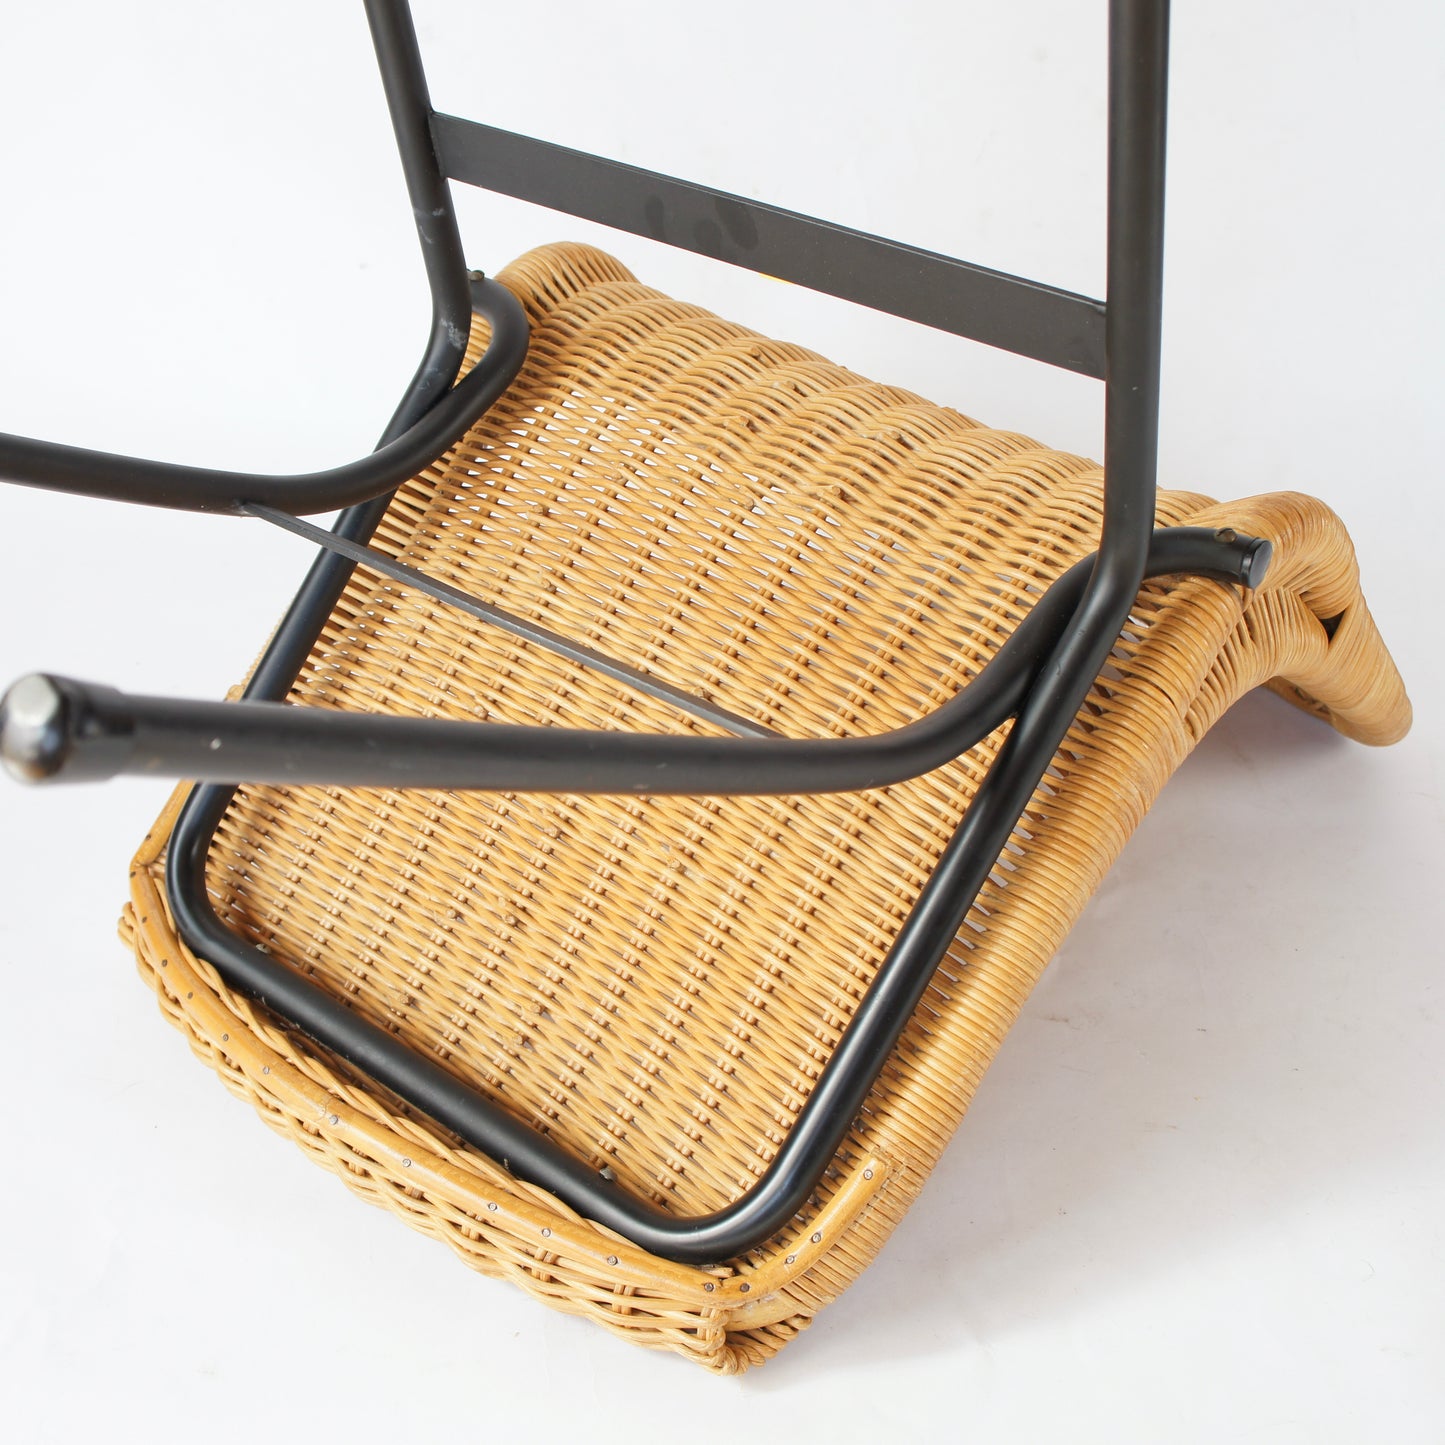 Ratan Chair by Rohe Noordwolde 01